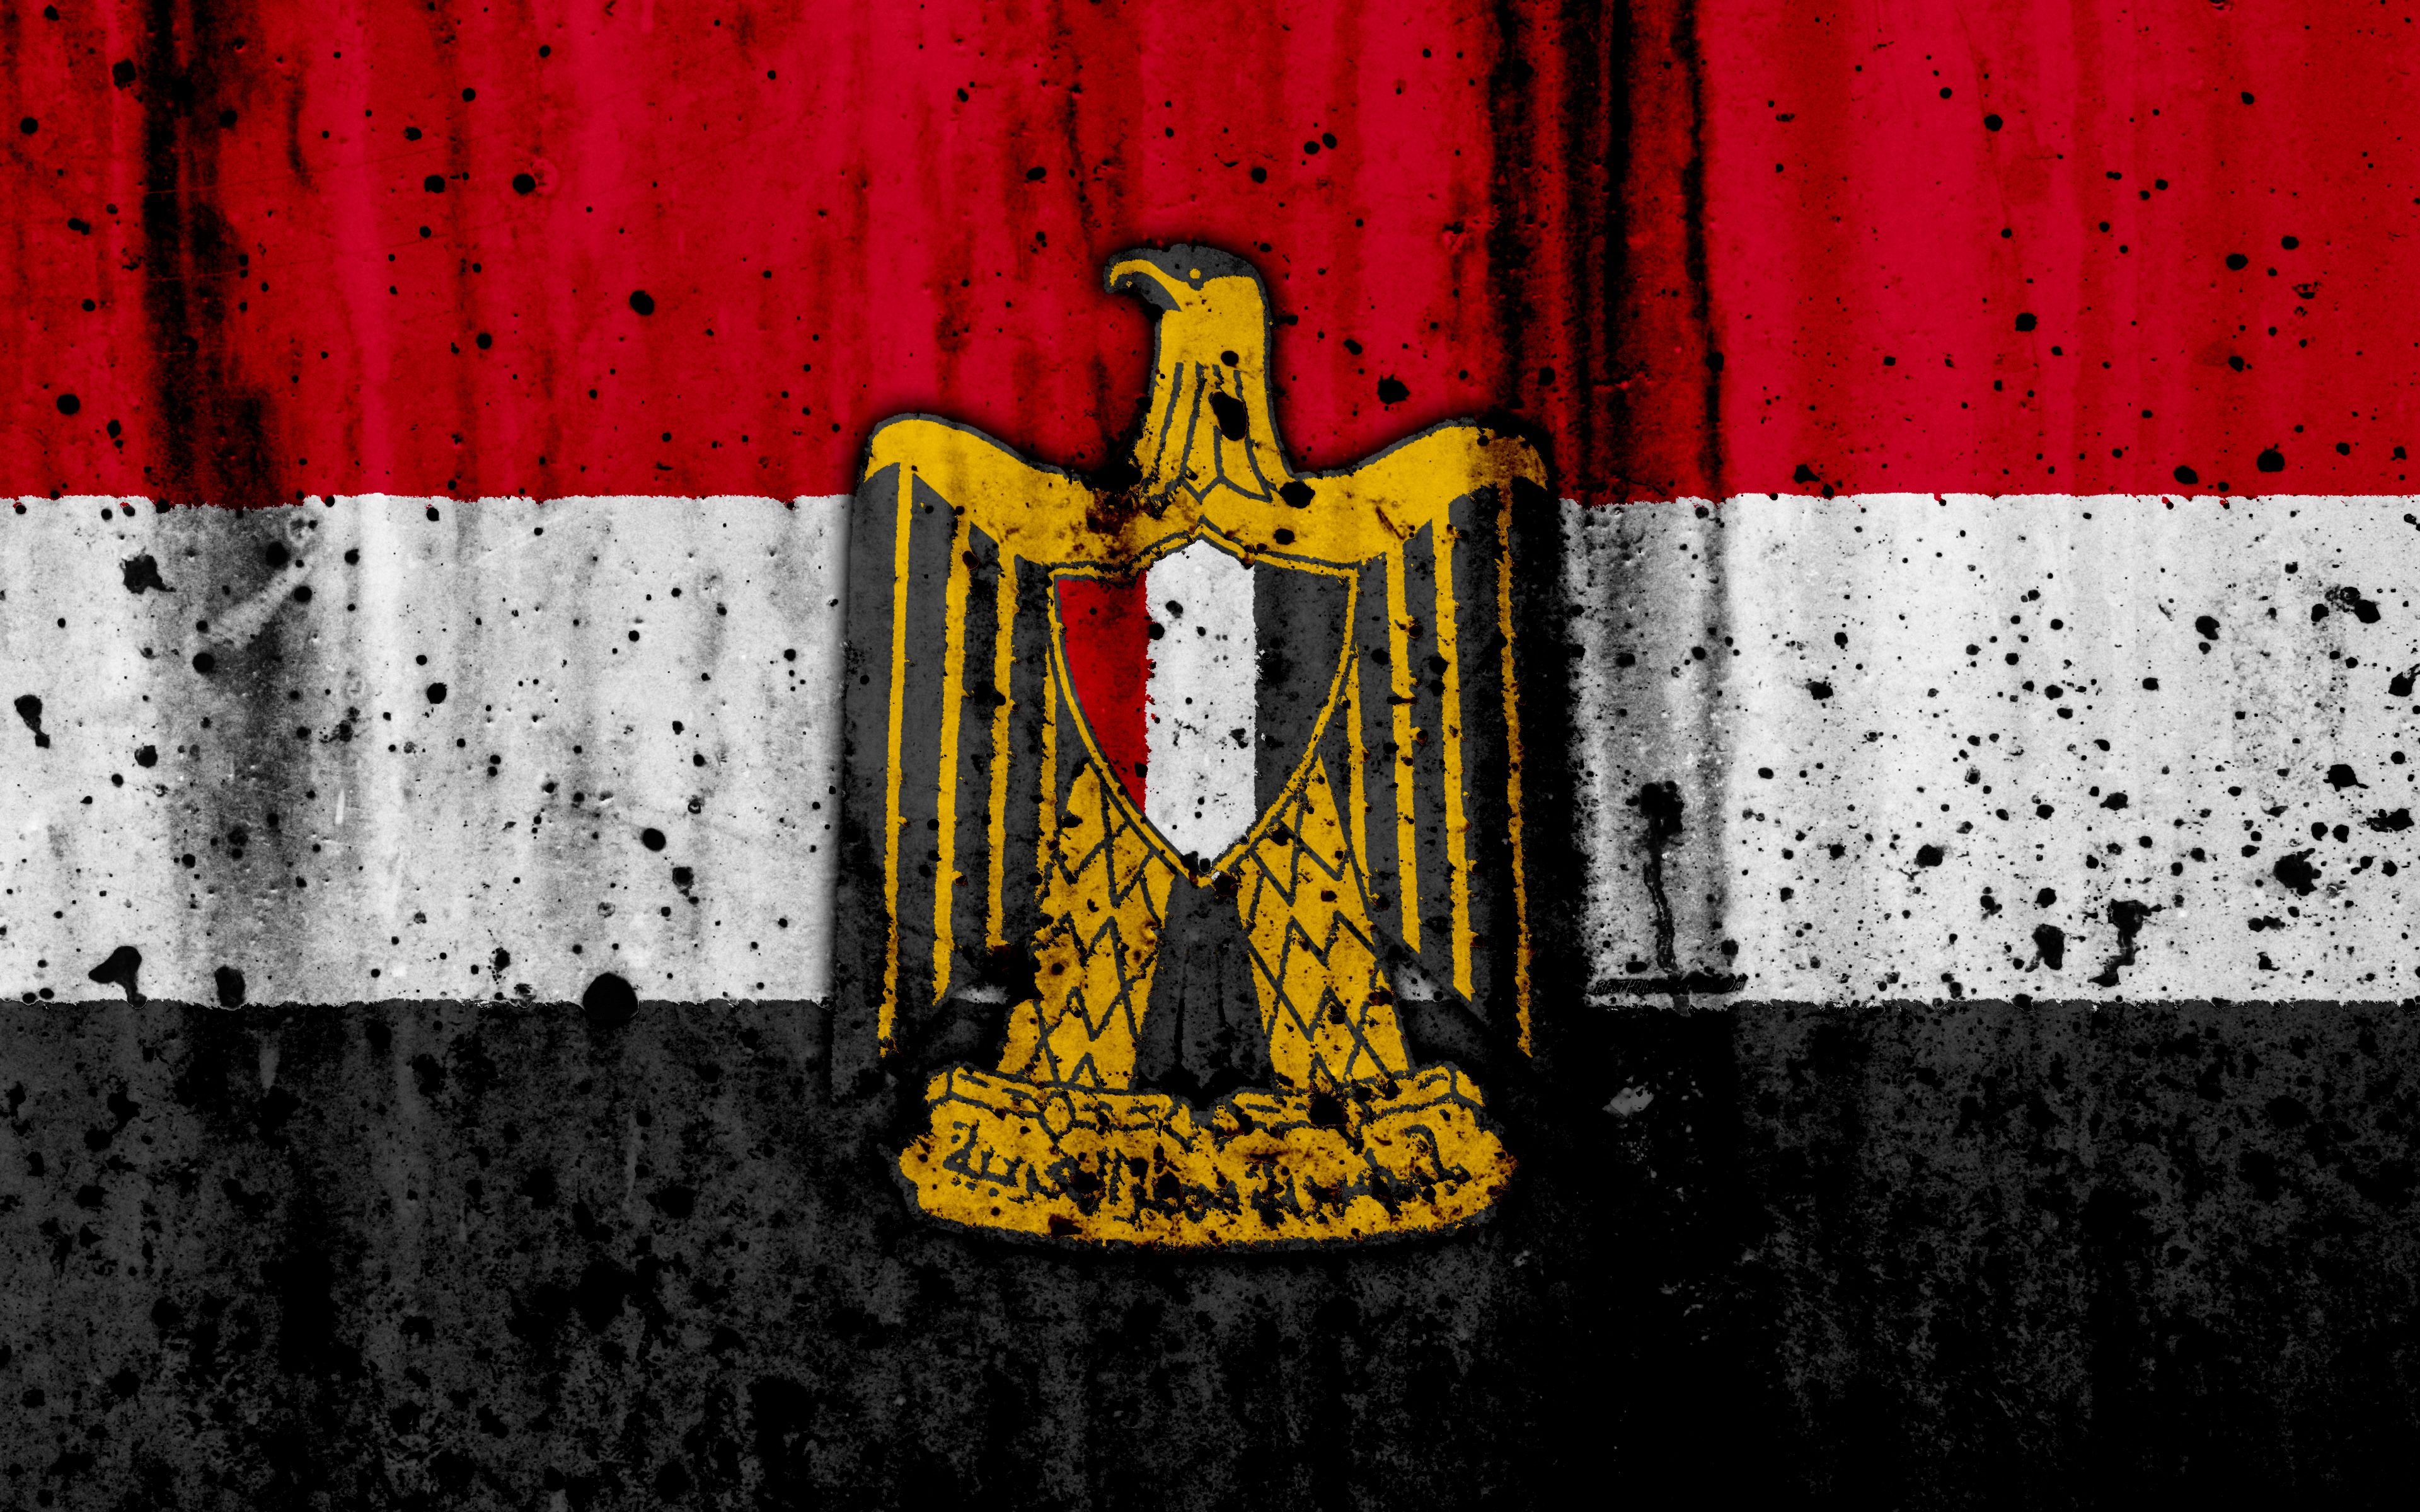 Download wallpaper Egyptian flag, 4k, grunge, Asia, flag of Egypt, national symbols, Egypt, Egyptian national emblem, national flag, coat of arms of Egypt for desktop with resolution 3840x2400. High Quality HD picture